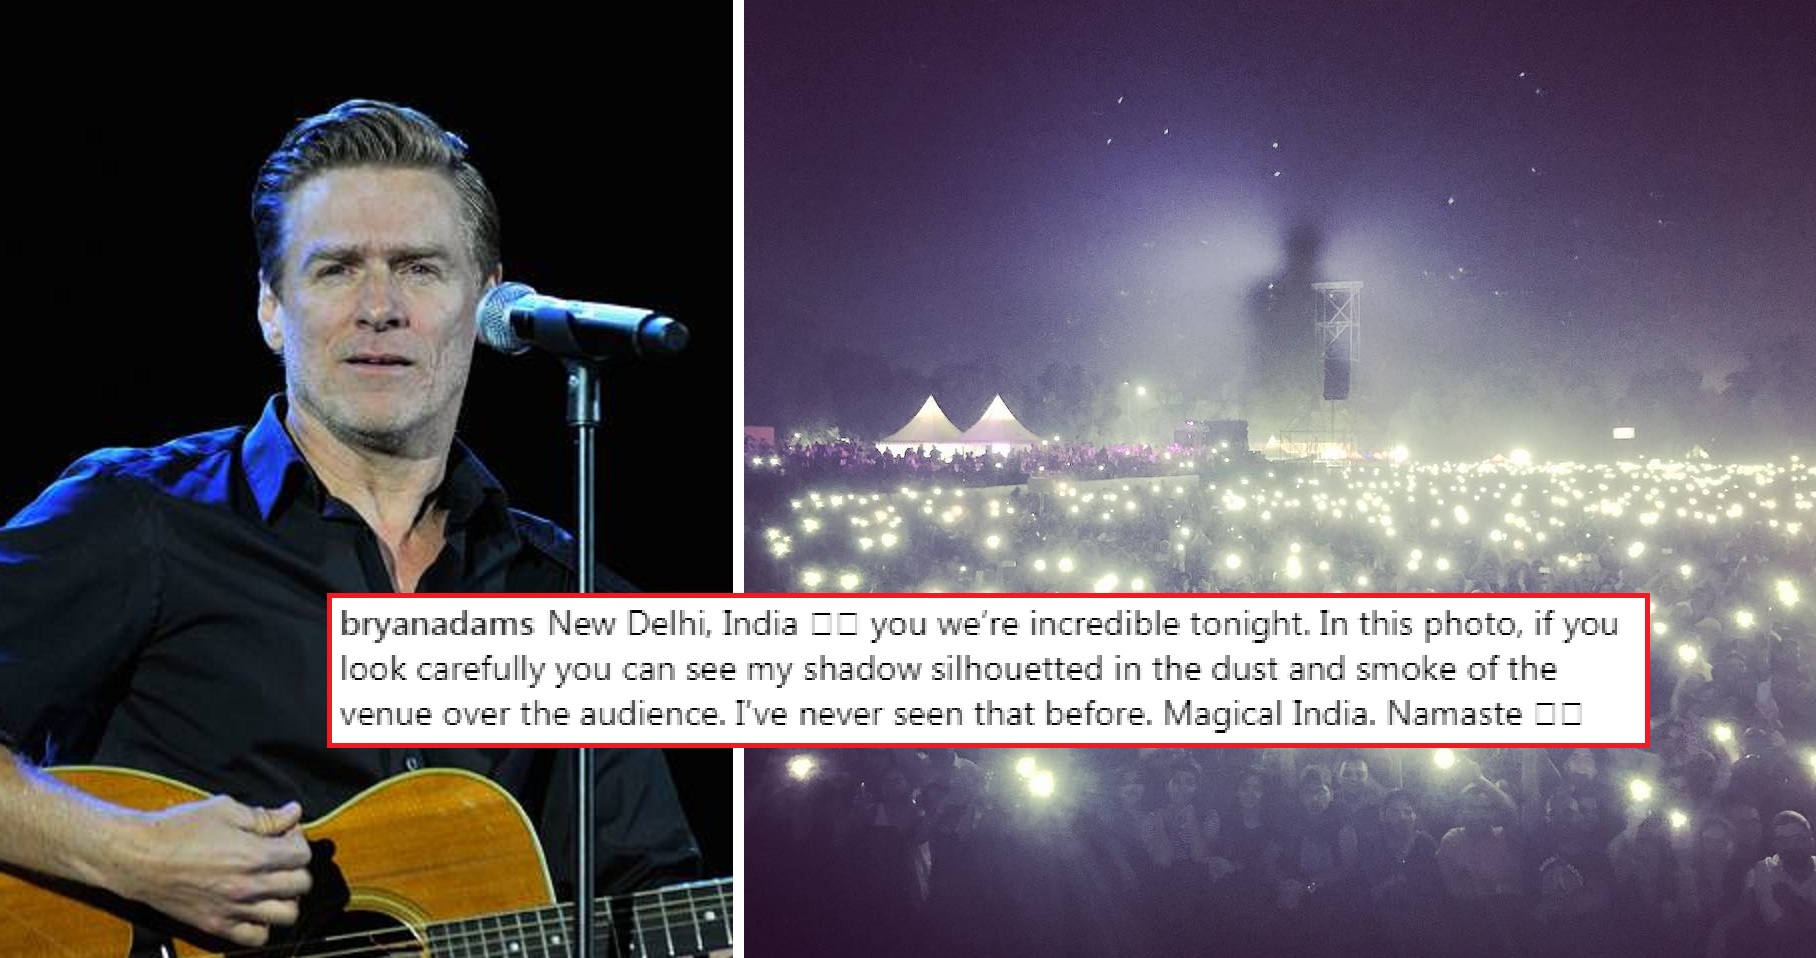 Air Pollution Created a “Giant Shadow” of Bryan Adams at His Concert in Gurugram!